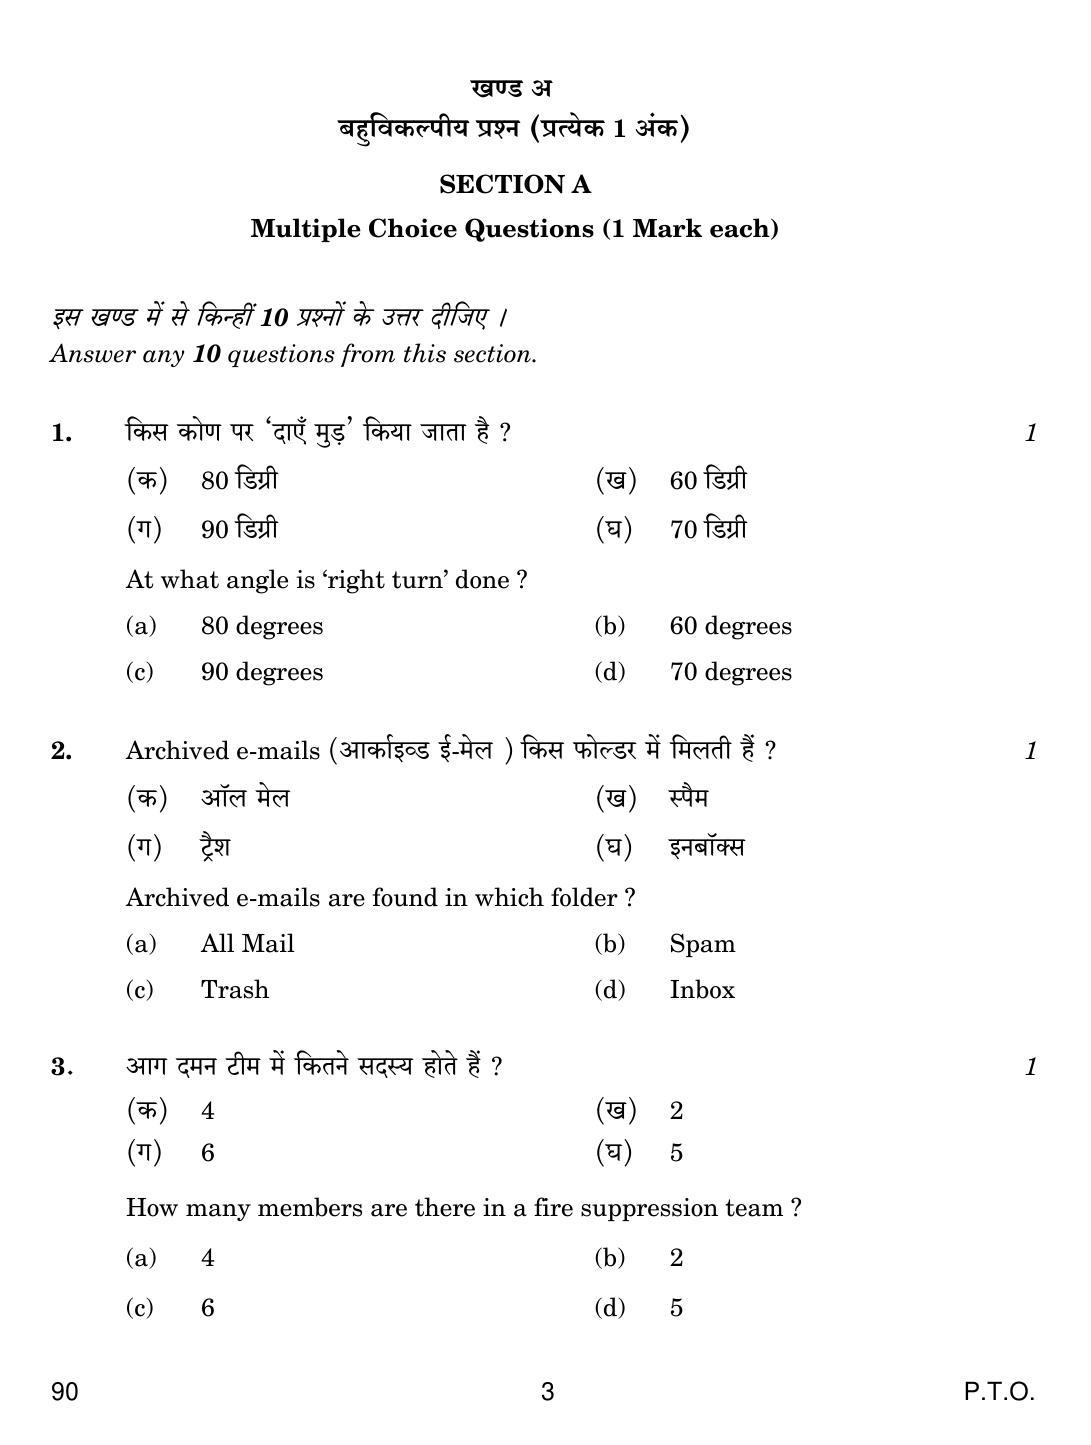 CBSE Class 10 90 SECURITY 2019 Question Paper - Page 3